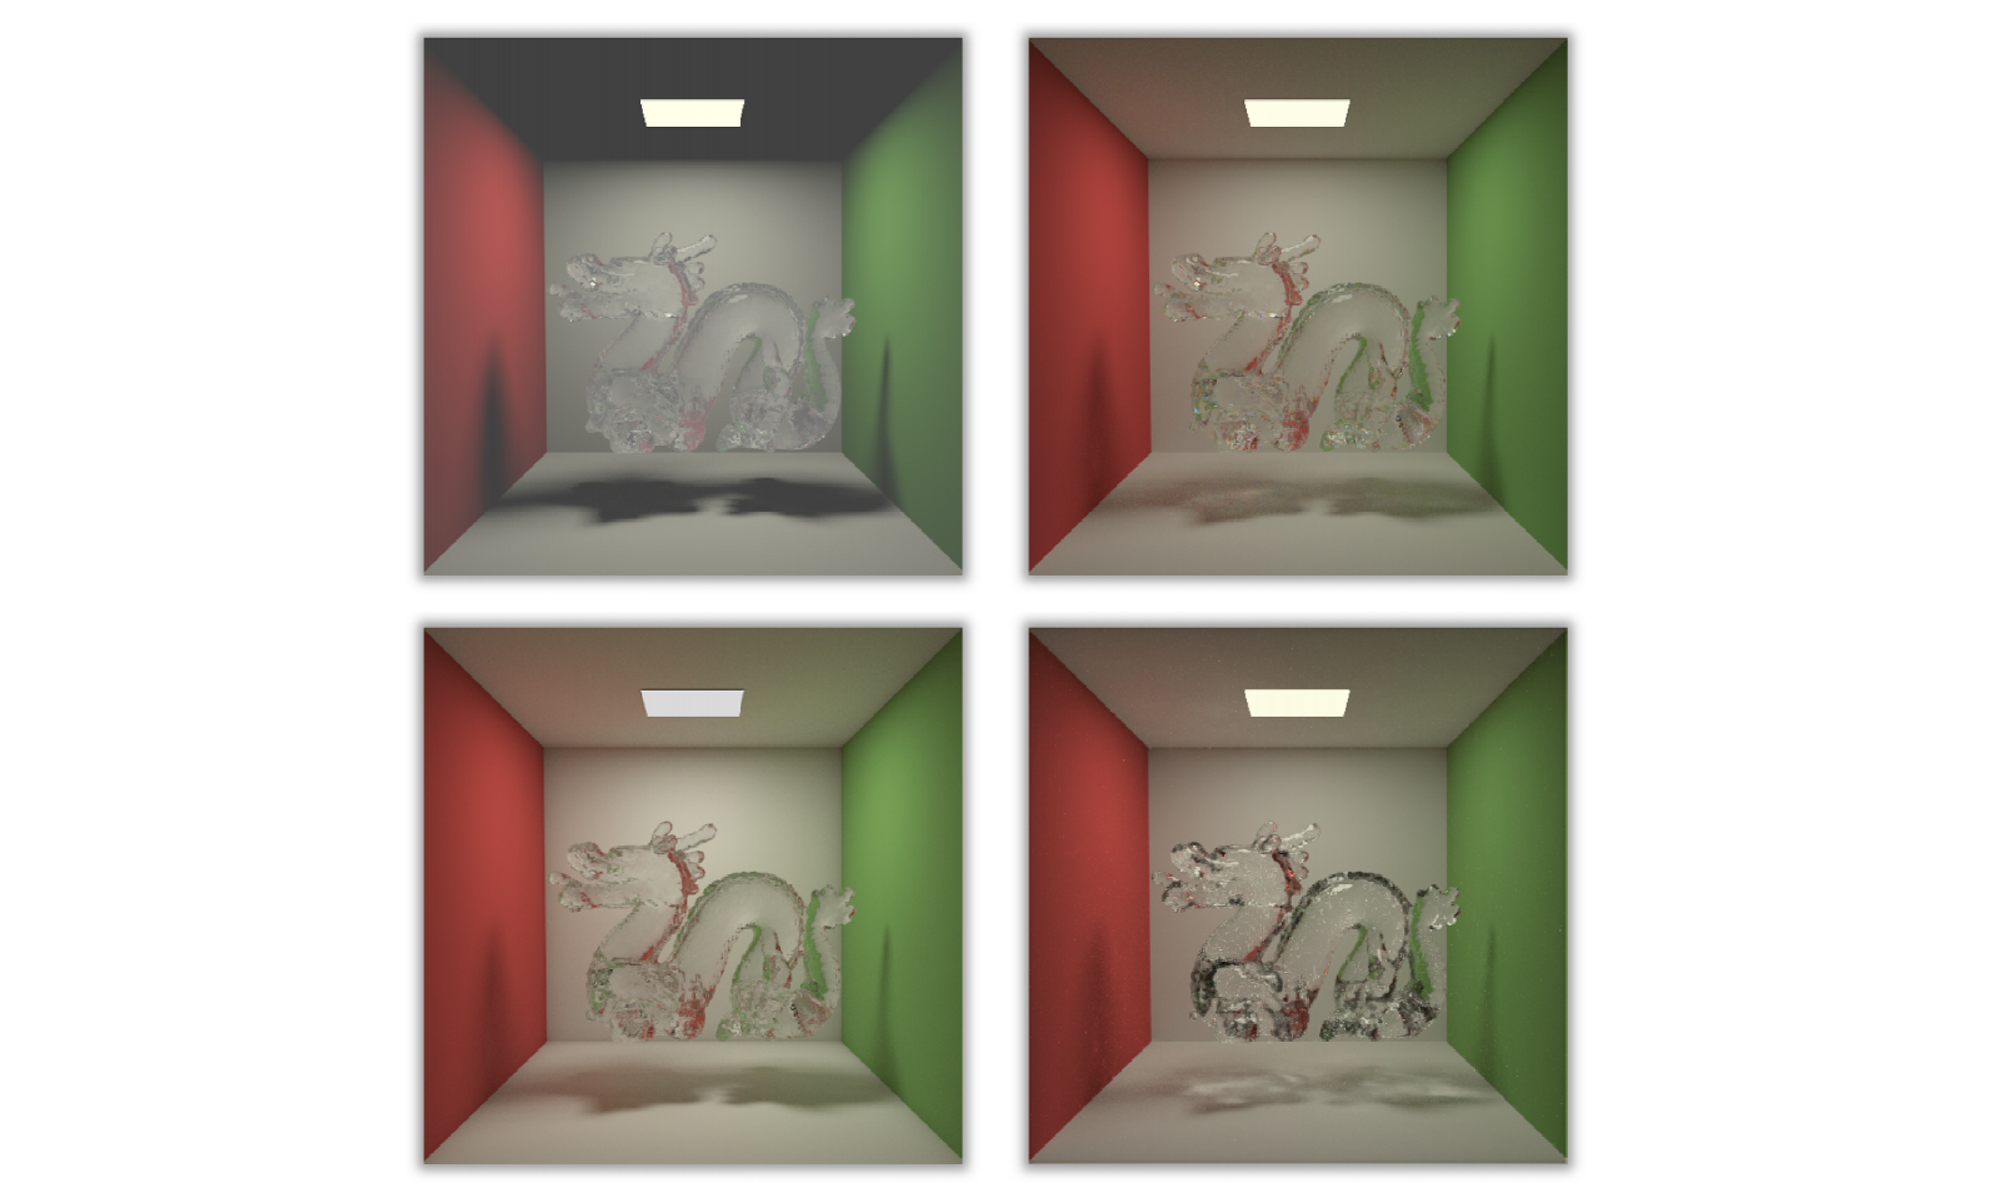 (Milton) The same scene rendered using ray tracing (top left), path tracing (top right), bidirectional path tracing (bottom left), and MLT (bottom right). The brute force path traced version in the top right should be seen as a correct, reference image. Note the lack of caustics on the floor and lack of indirect illumination in the ray traced version. Discrepancies in the bidirectional path tracing and MLT renders are due to differences in tone mapping as well as implementation issues with correctly handling specular paths.